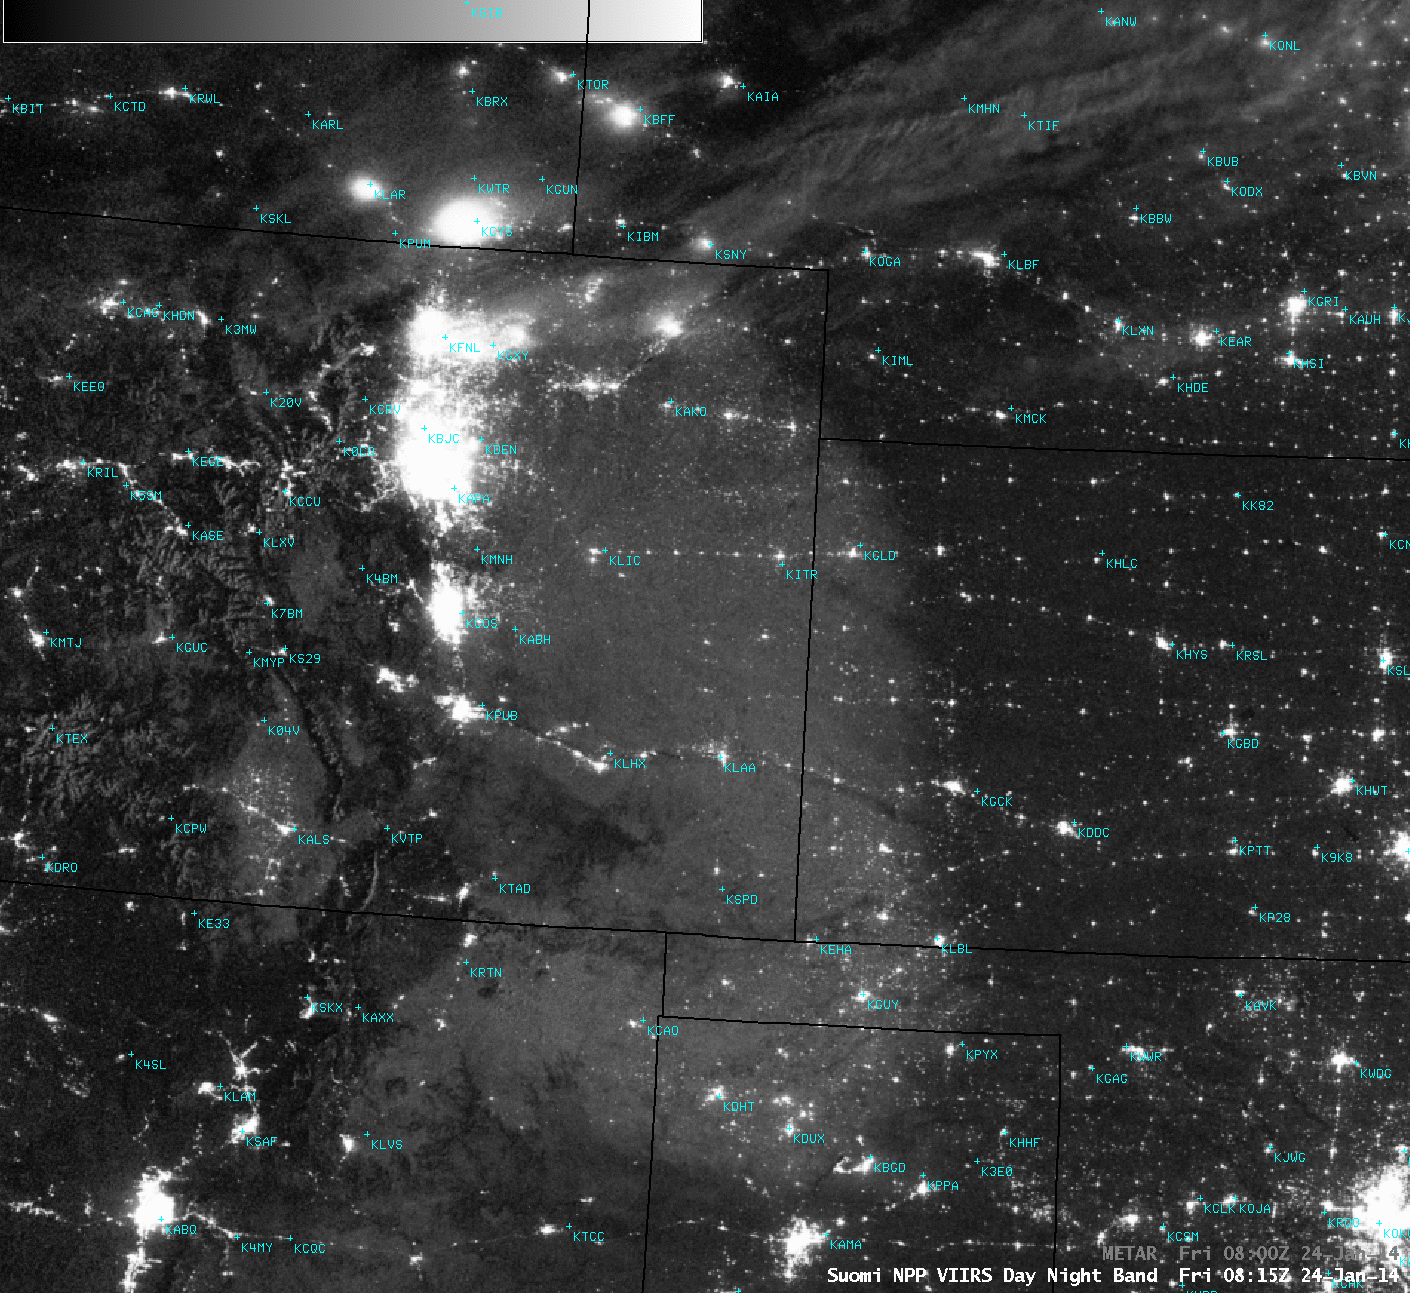 Suomi NPP VIIRS 0.7 Âµm Day/Night Band, IR BTD "fog/stratus product", and 11.45 Âµm IR channel images